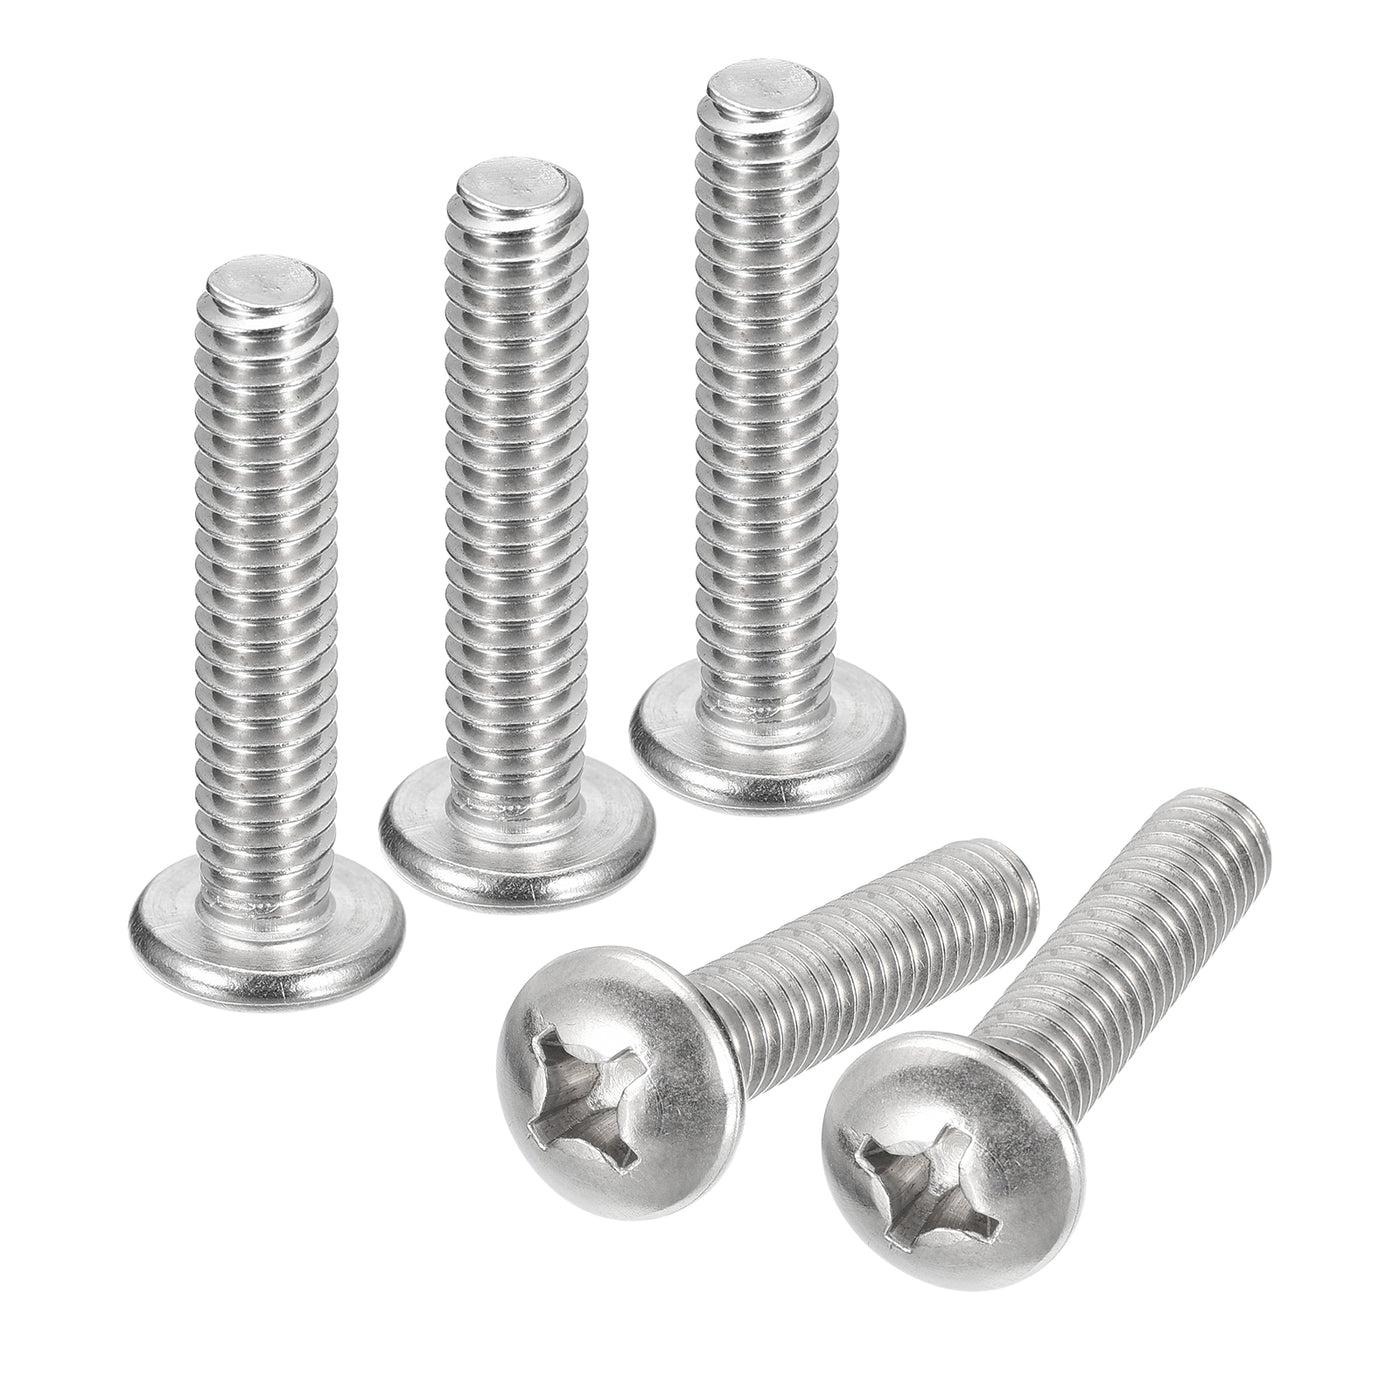 uxcell Uxcell 1/4-20x1-1/4" Pan Head Machine Screws, Stainless Steel 18-8 Screw, Pack of 50